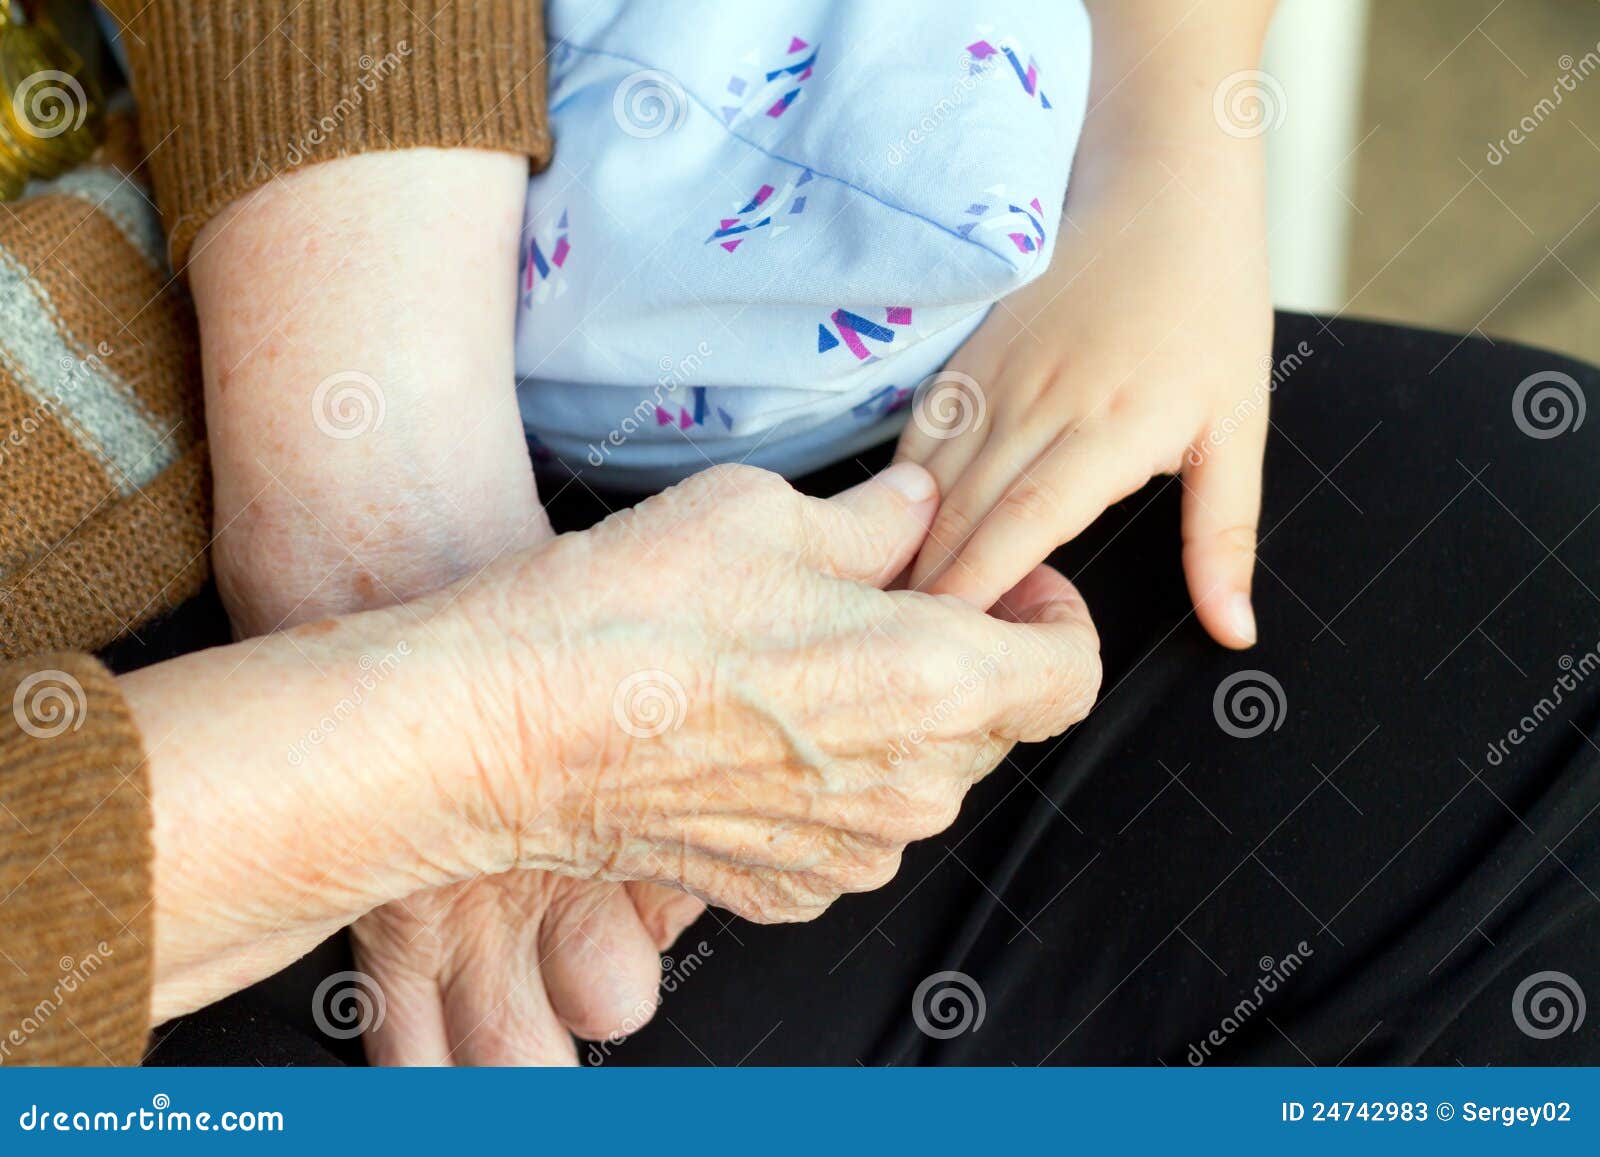 Old And Young Hand Stock Image Image Of Military Friendship 24742983